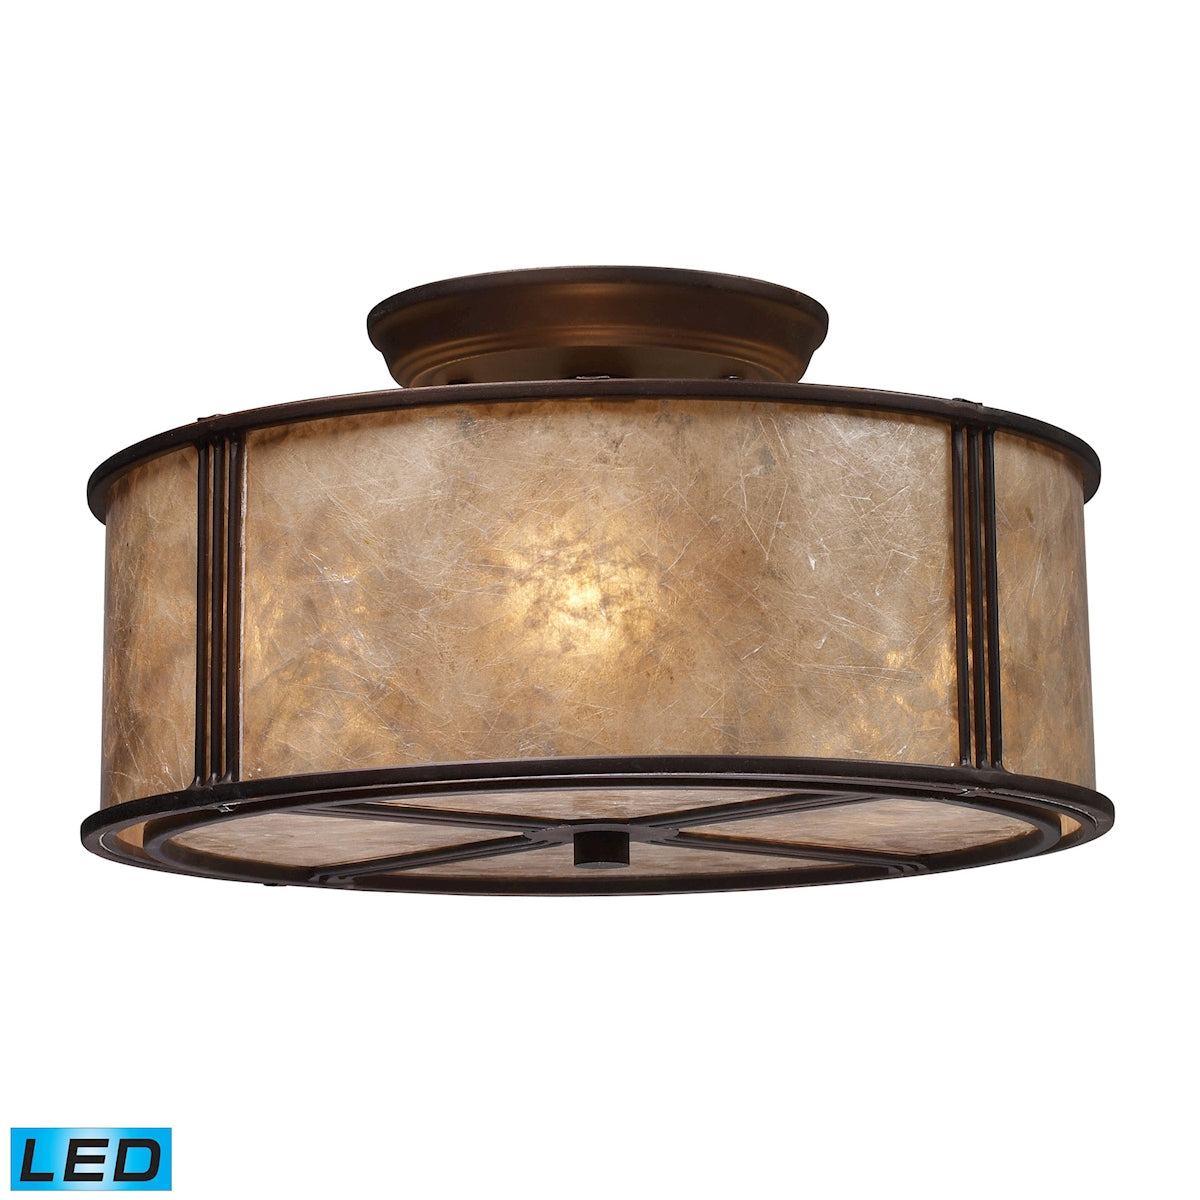 Barringer 3-Light Semi Flush in Aged Bronze with Tan Mica Shade - Includes LED Bulbs